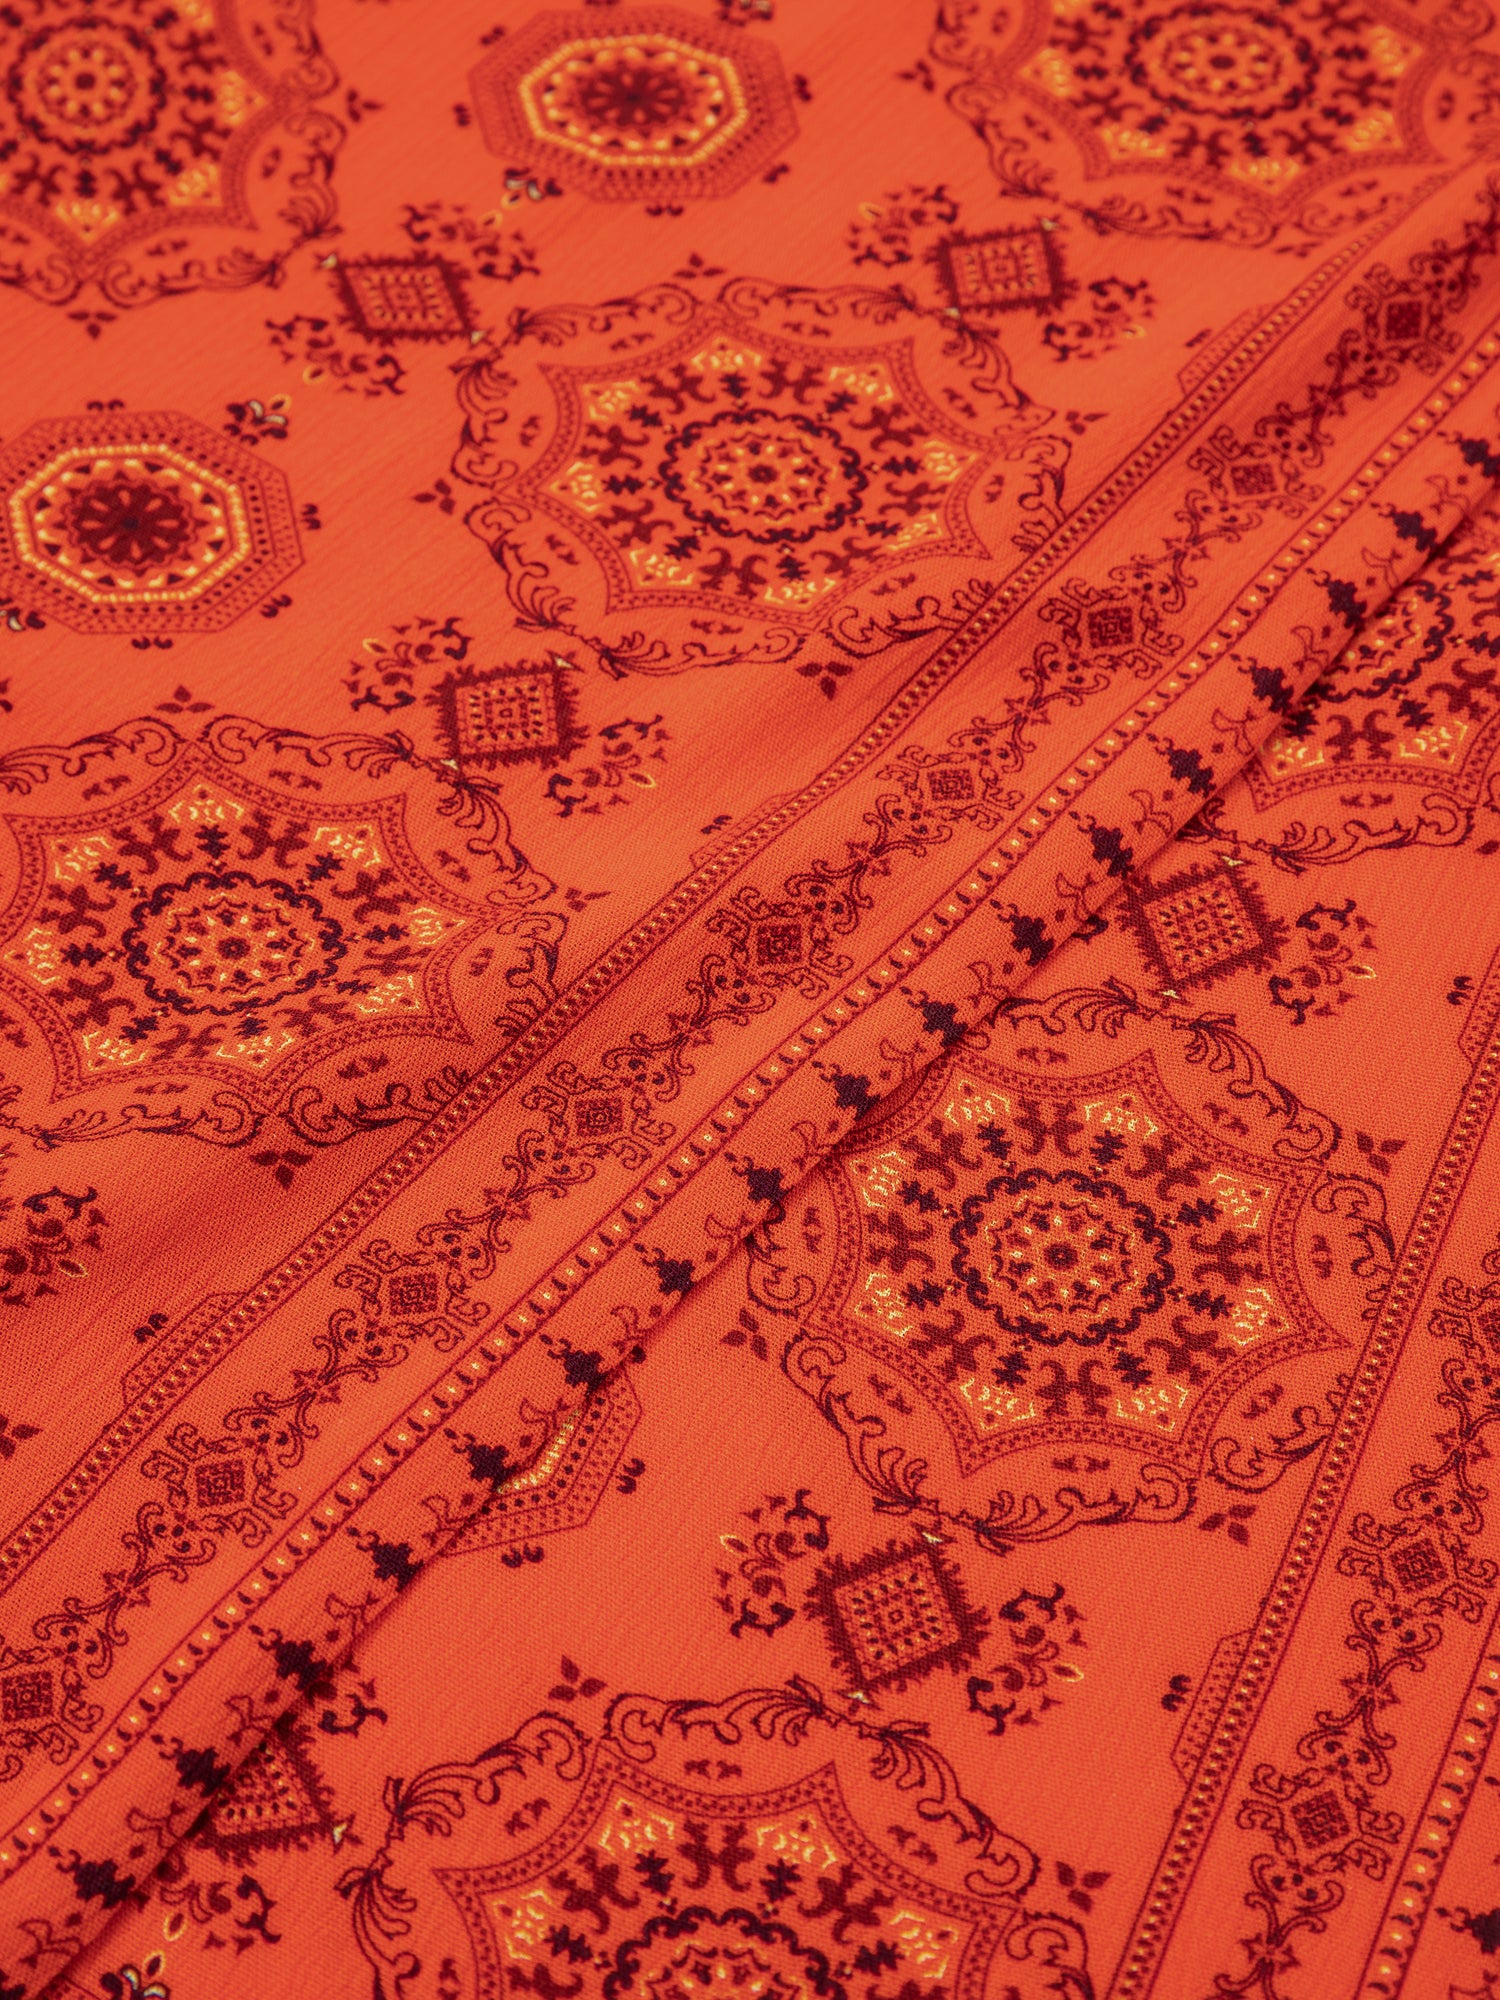 A close up of a Found Grenadine Scarf with Indo-Aryan prints.